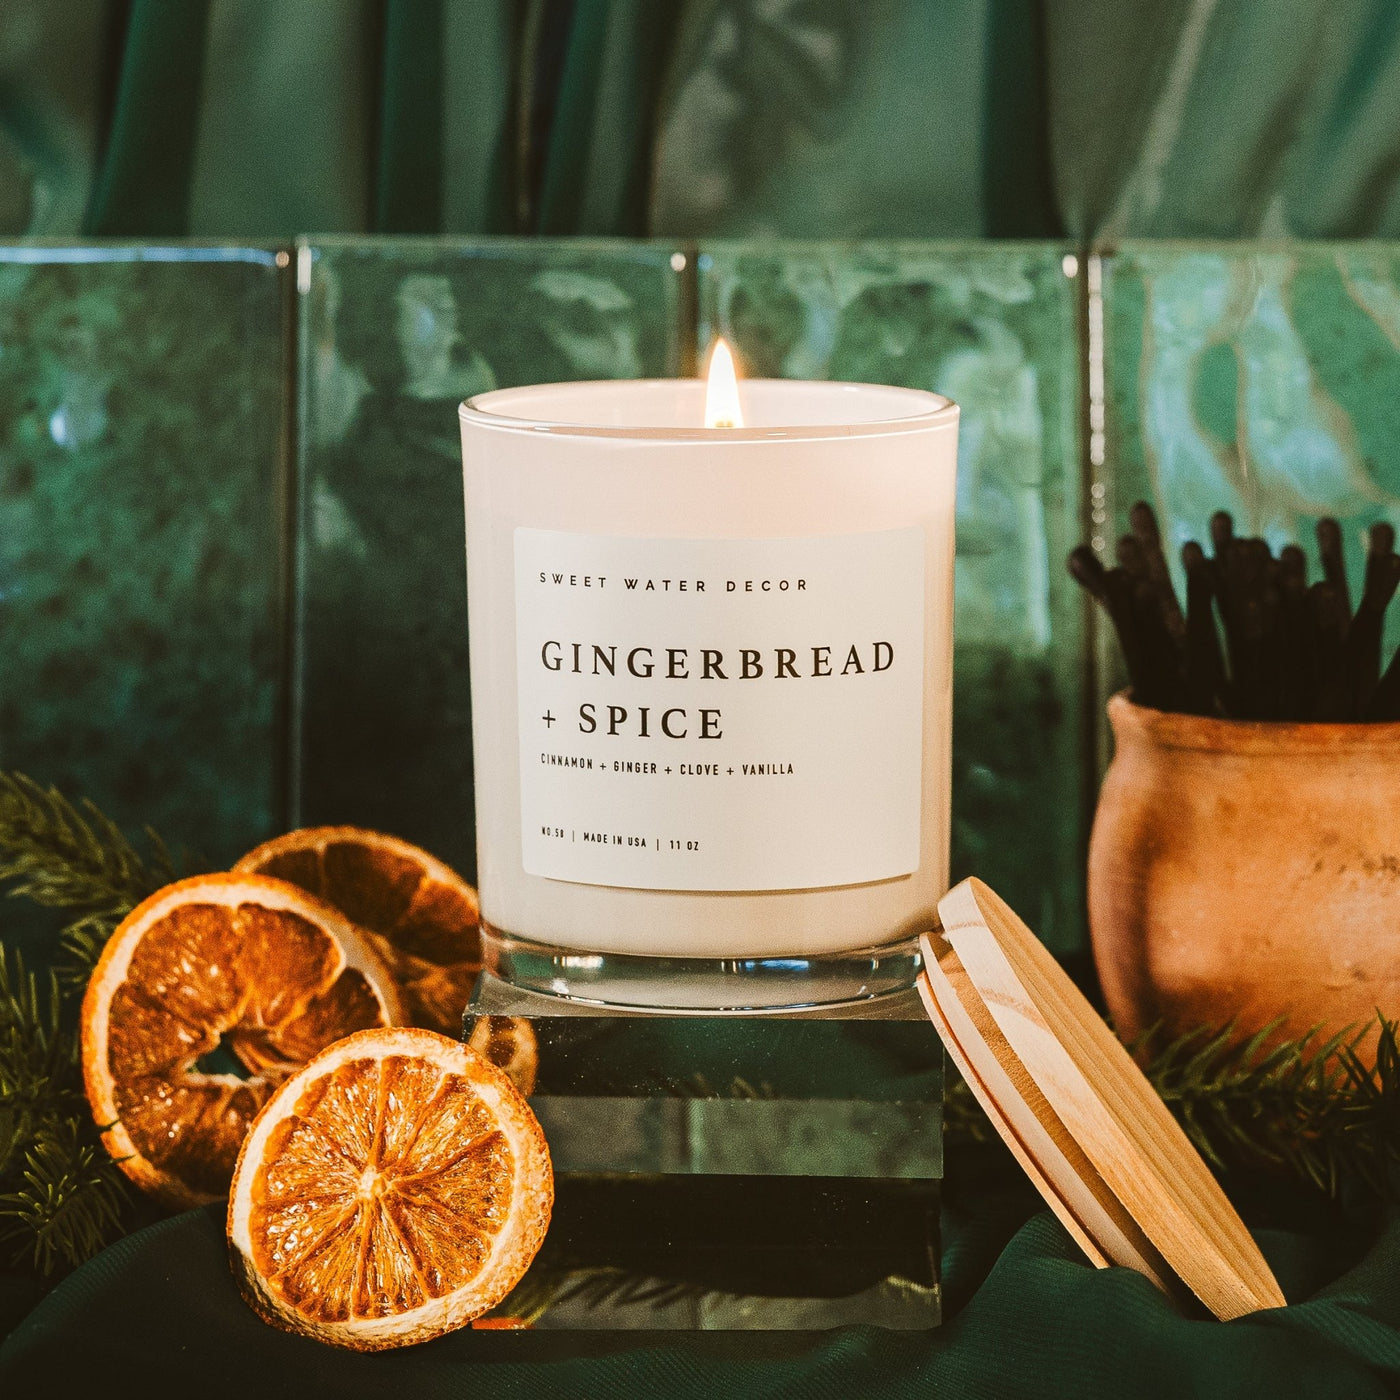 Gingerbread and Spice Soy Candle - White Jar - 11 oz - Sweet Water Decor - Candles